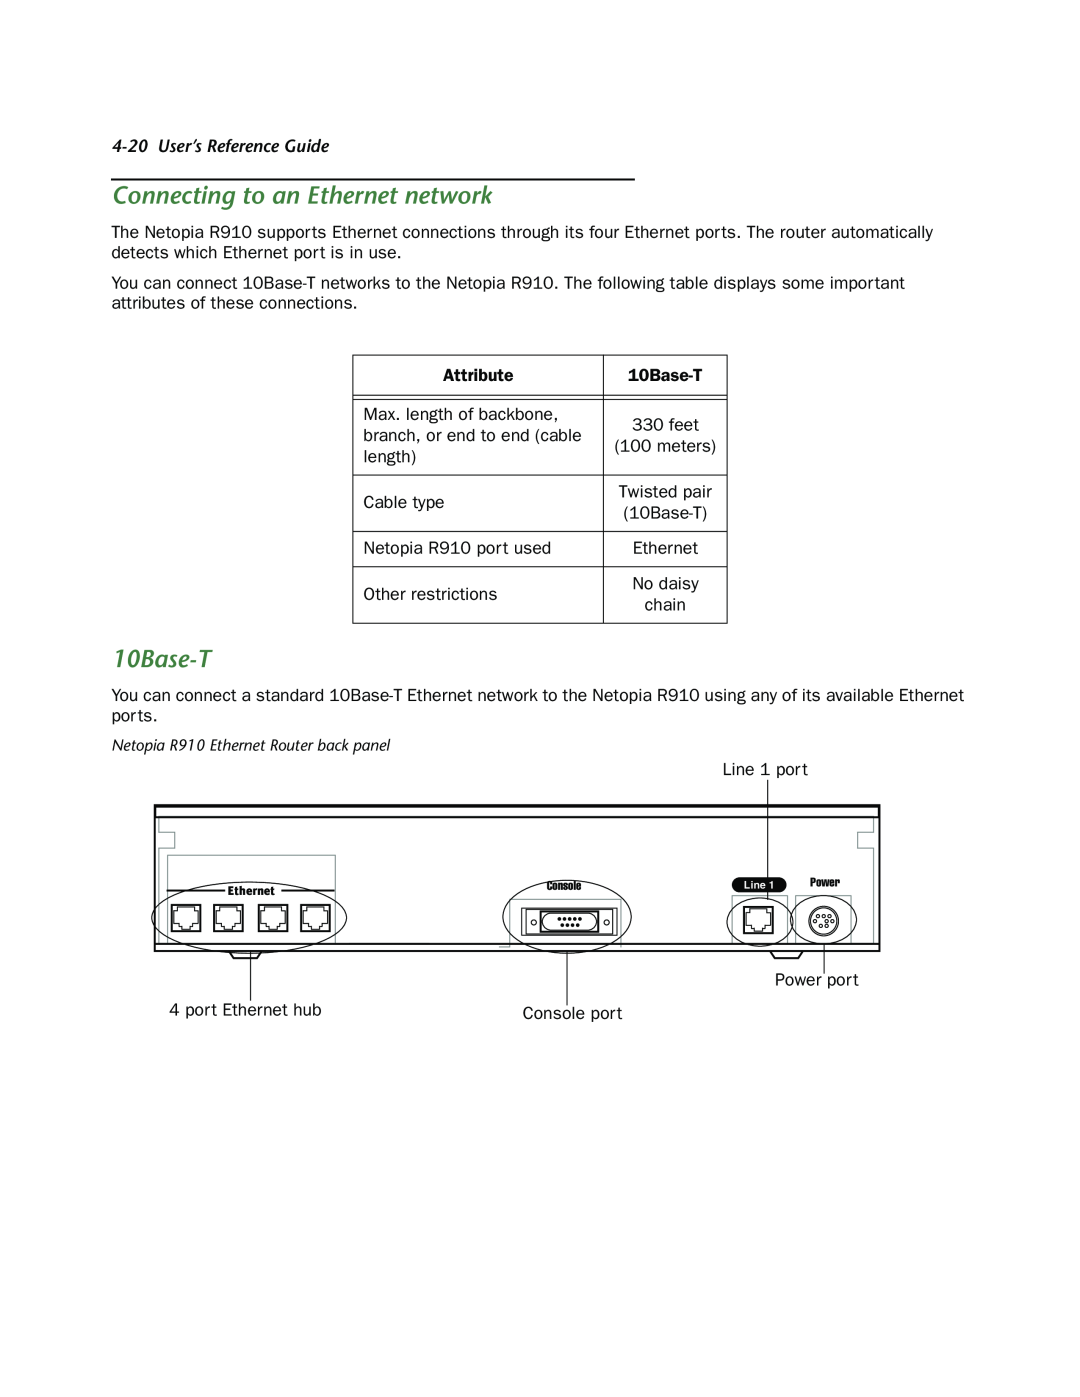 Netopia R910 manual Connecting to an Ethernet network, 10Base-T, User’s Reference Guide 